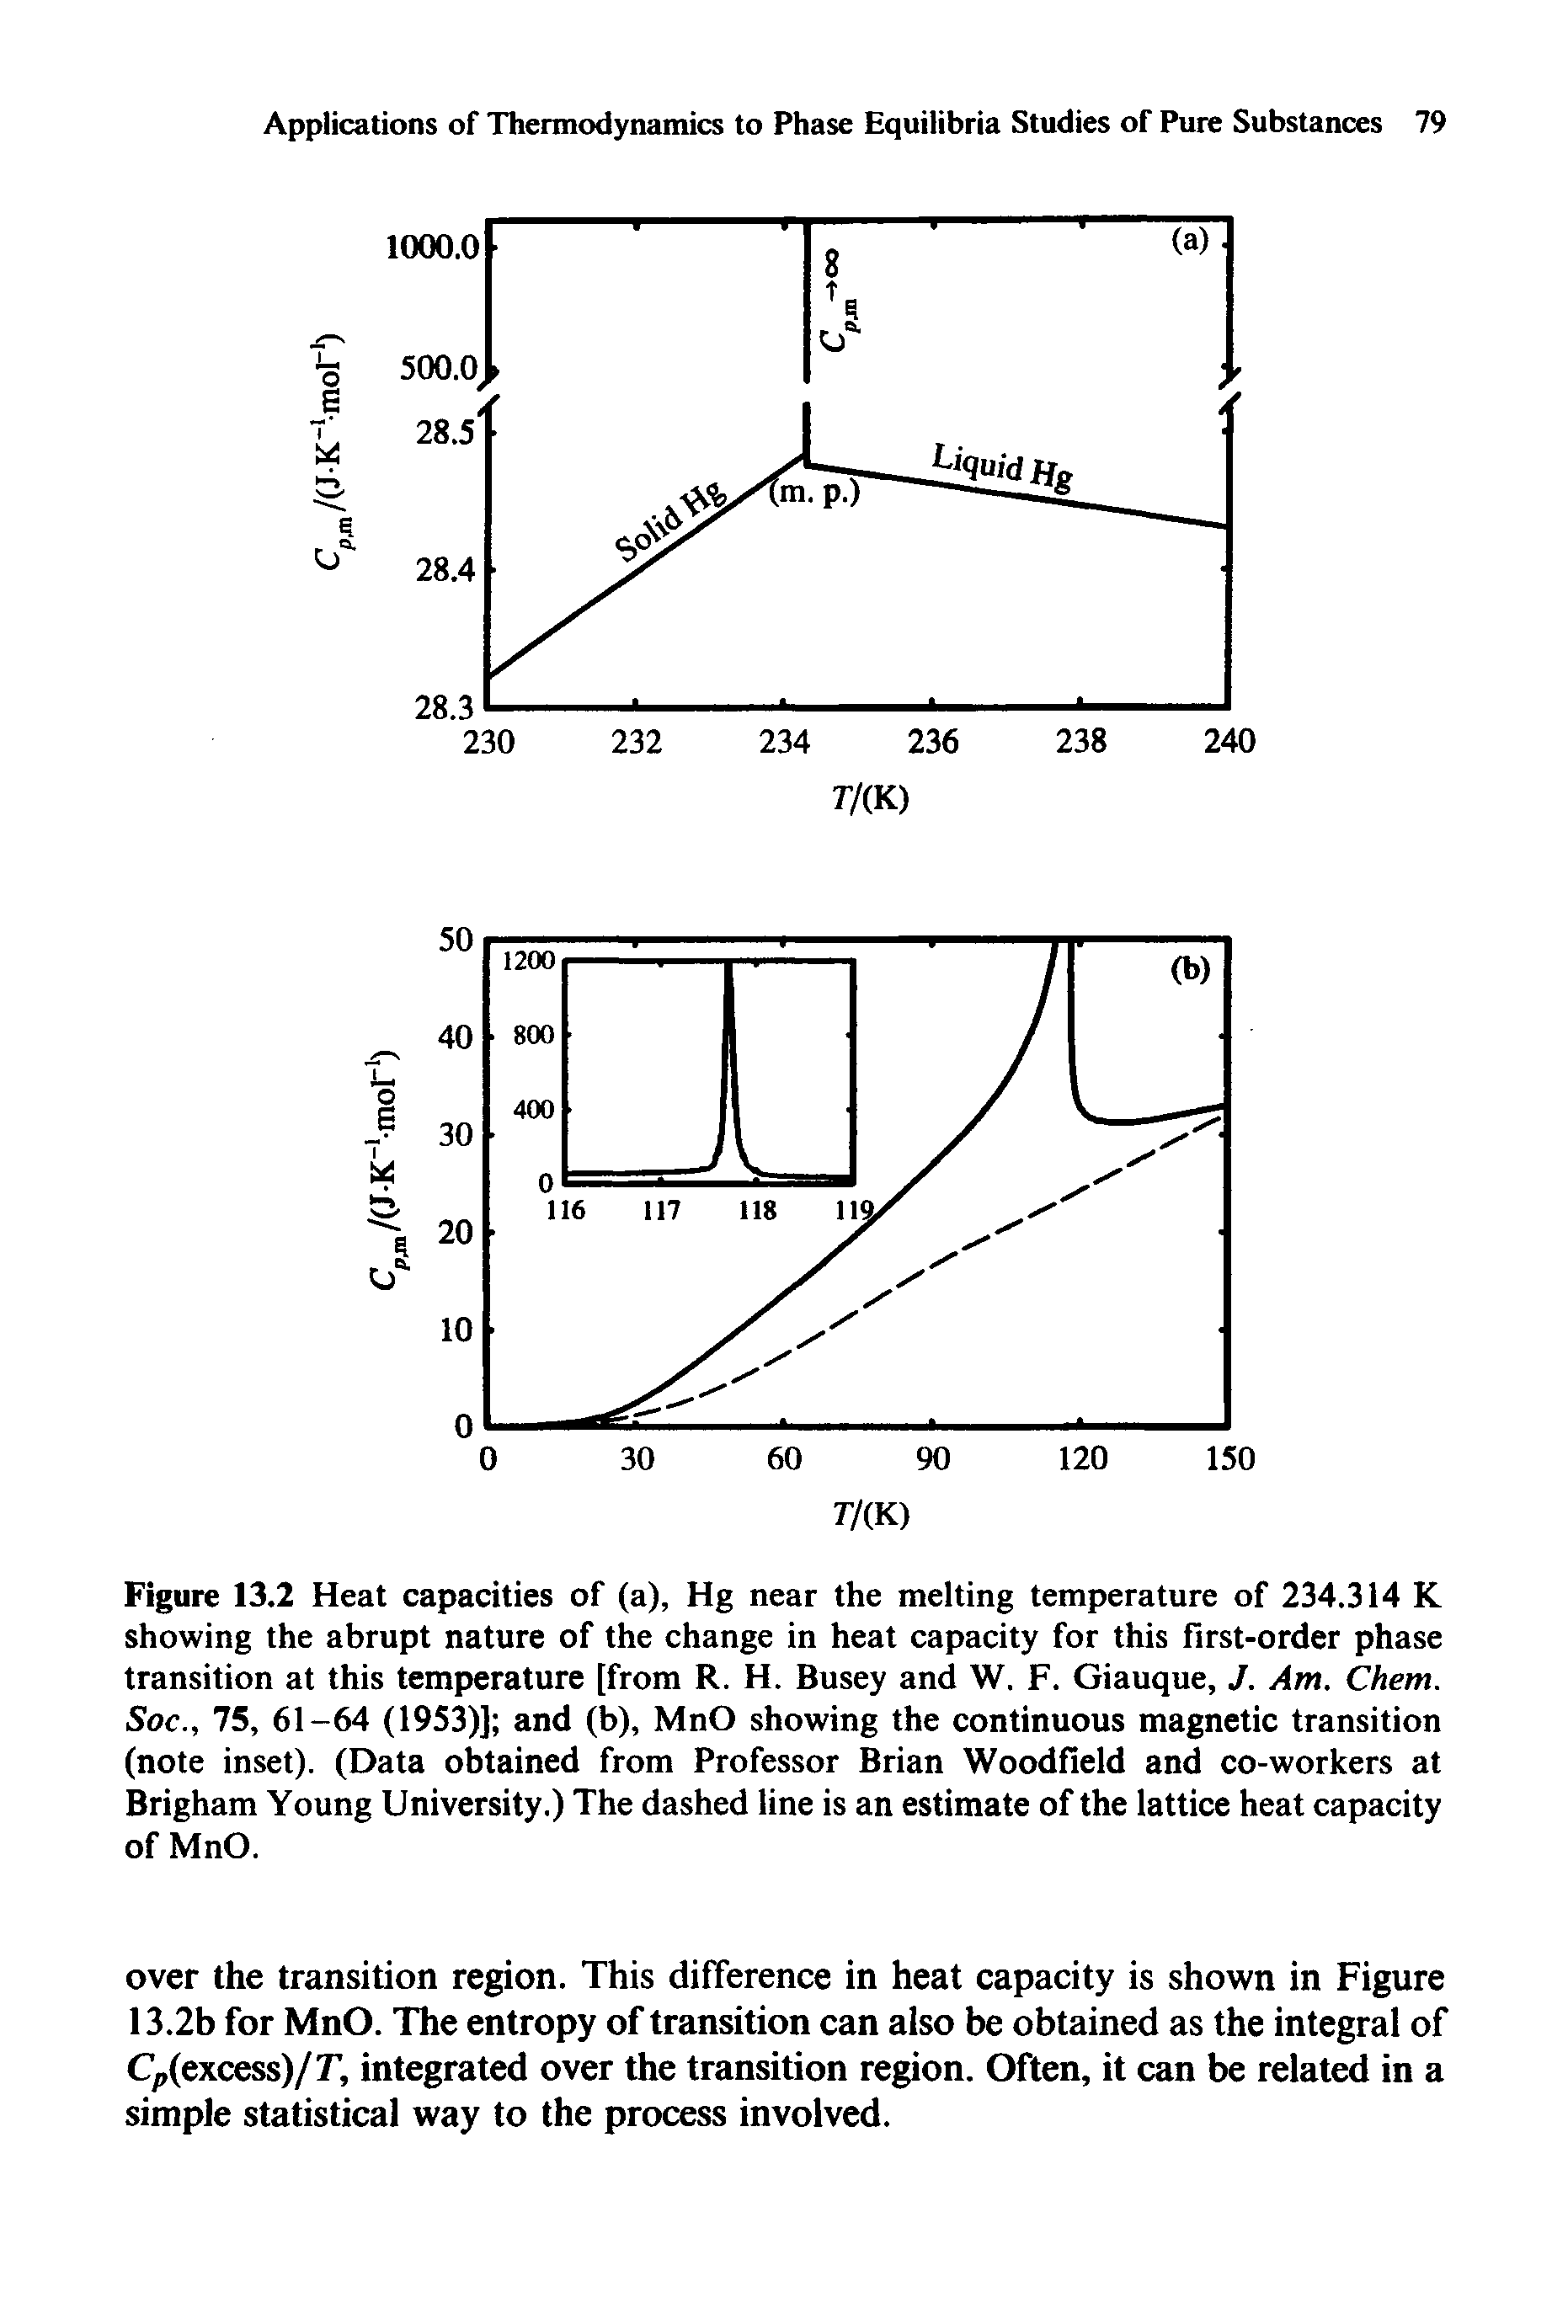 Figure 13.2 Heat capacities of (a), Hg near the melting temperature of 234.314 K showing the abrupt nature of the change in heat capacity for this first-order phase transition at this temperature [from R. H. Busey and W. F. Giauque, J. Am. Chem. Soc., 75, 61-64 (1953)] and (b), MnO showing the continuous magnetic transition (note inset). (Data obtained from Professor Brian Woodfield and co-workers at Brigham Young University.) The dashed line is an estimate of the lattice heat capacity of MnO.